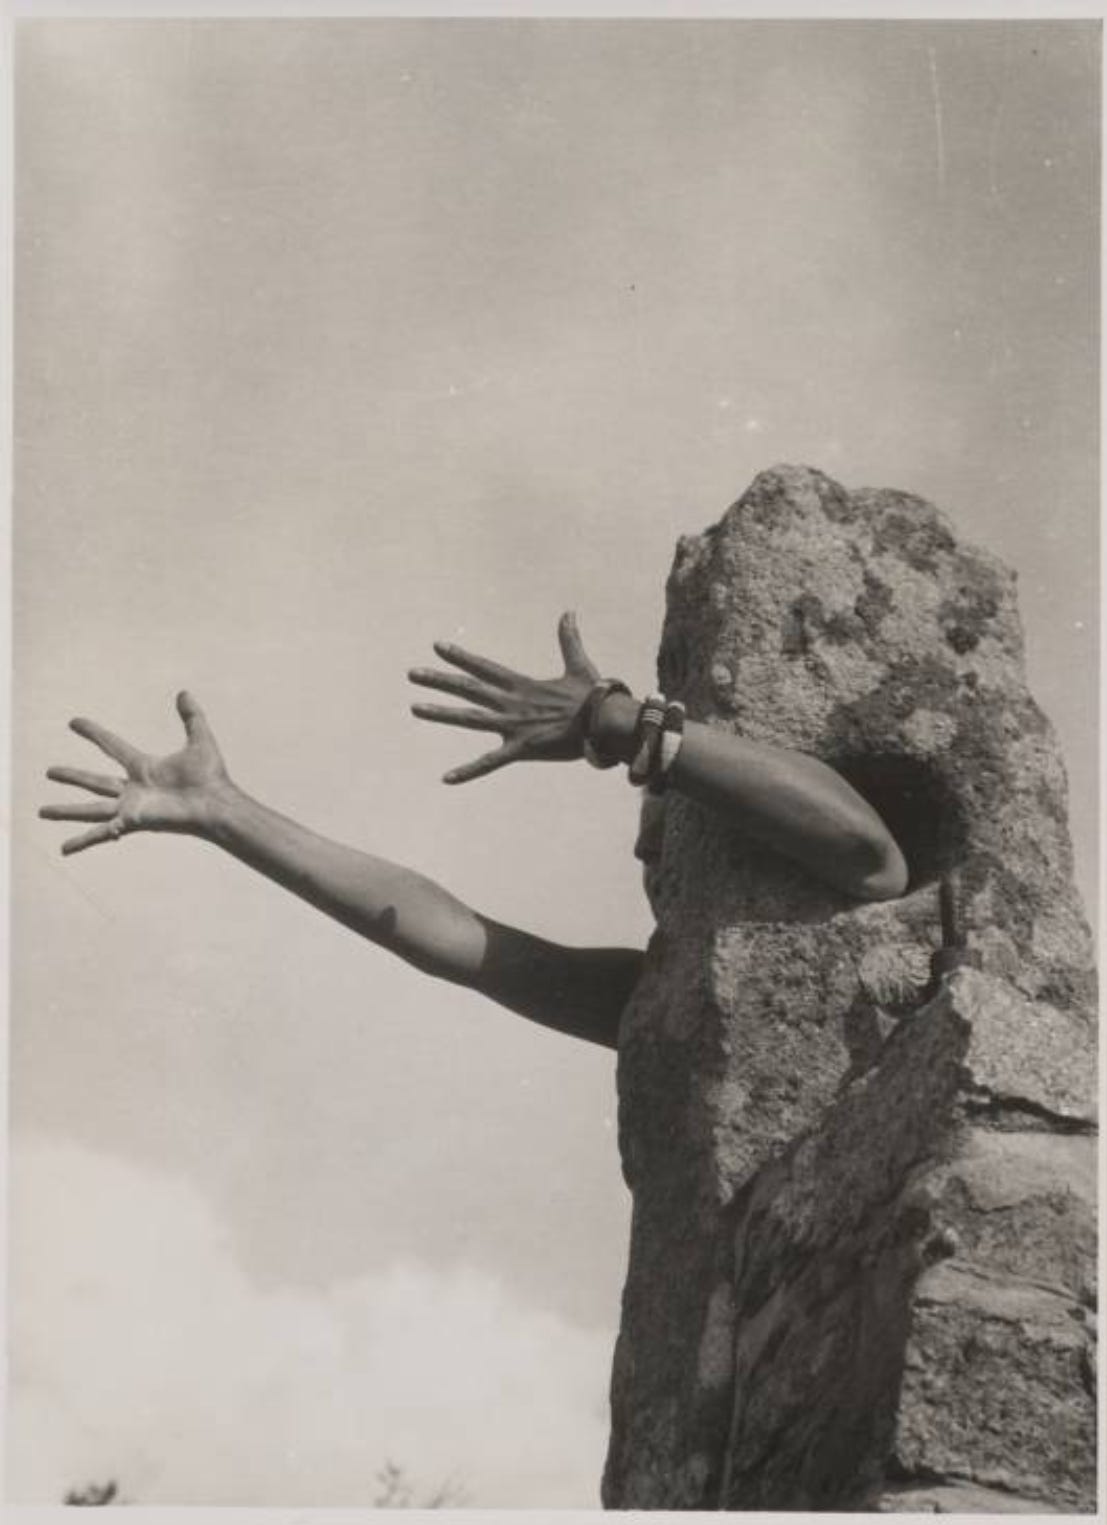 A self-portrait by Claude Cahun. Their arm is stuck through a hole in a person sized rock so they look like they're a rock with arms, extending their arms forward as if to hug somone.